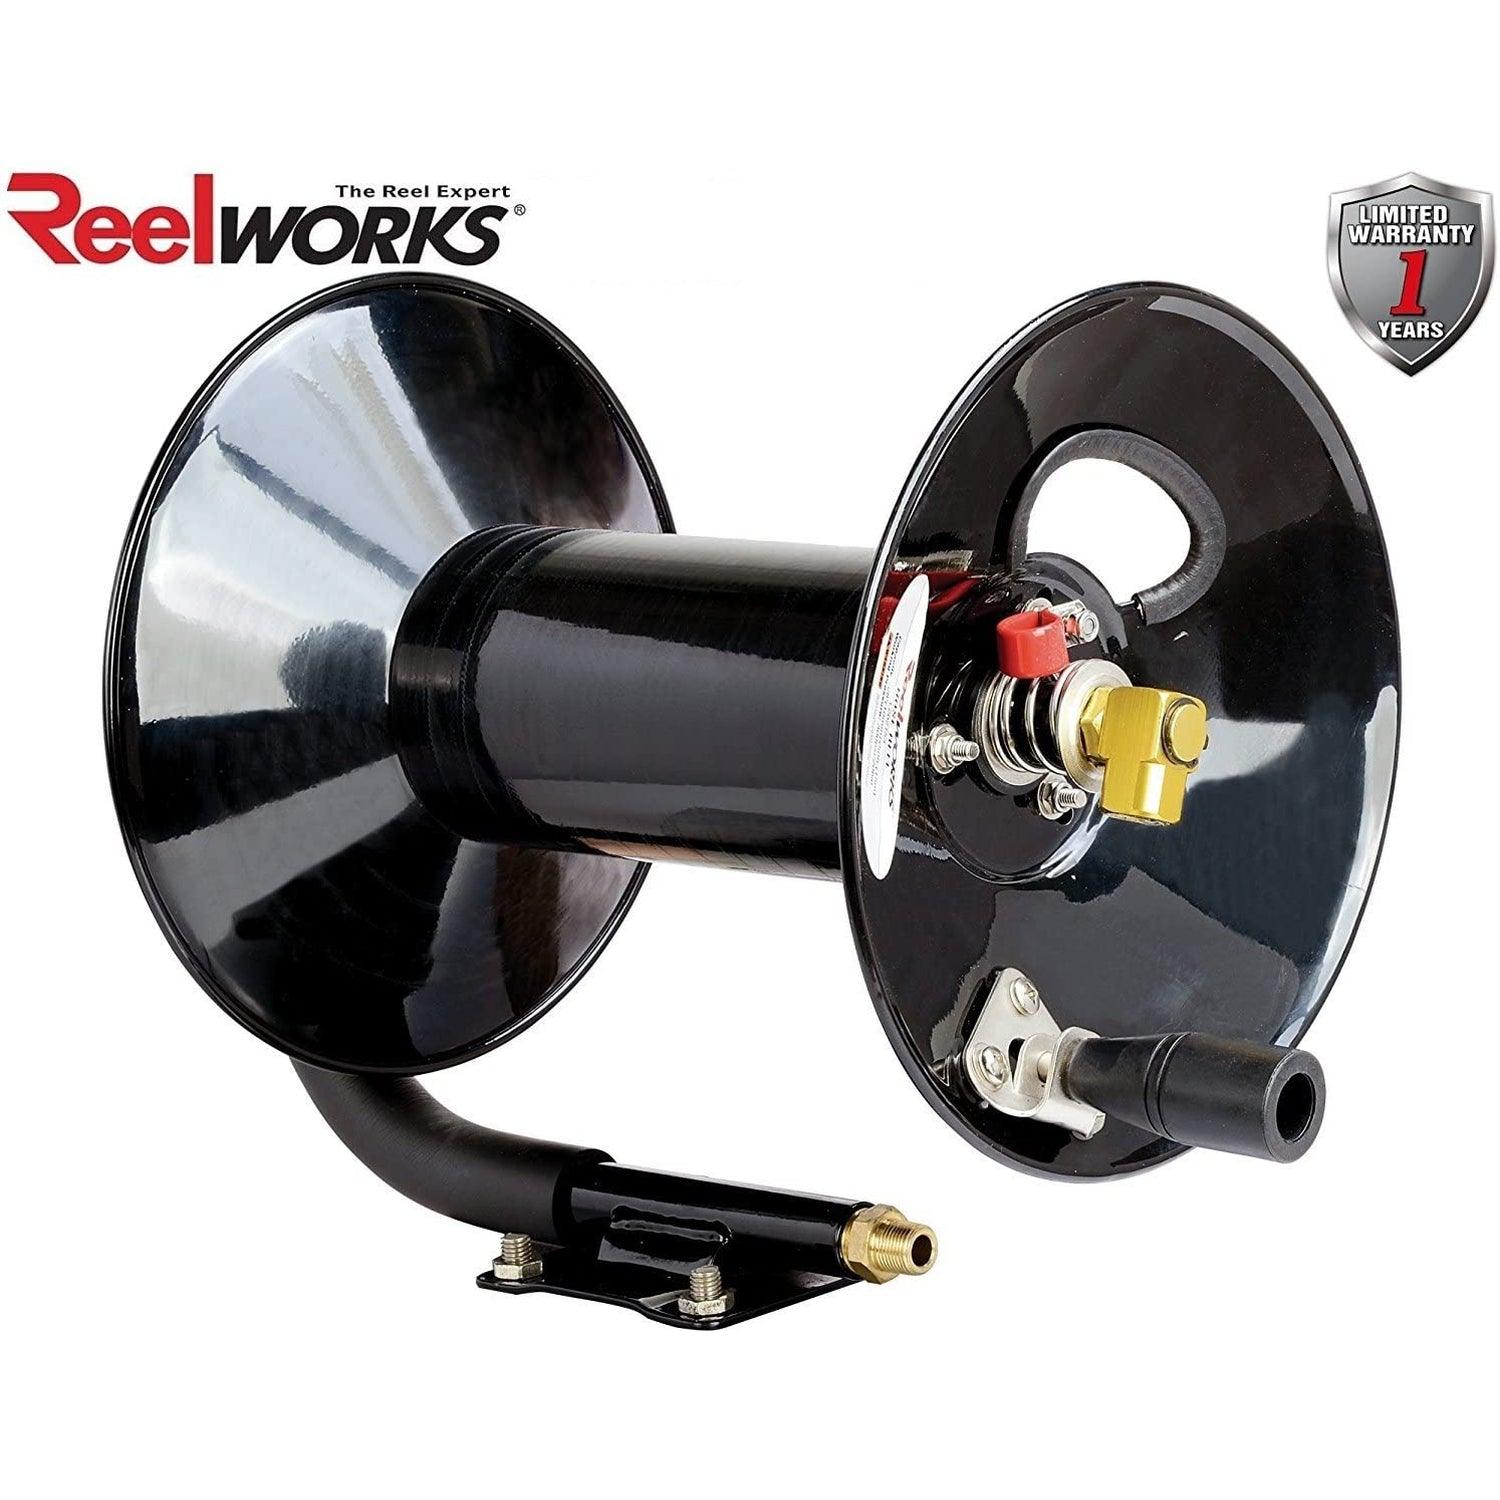 ReelWorks Air Hose Reel Retractable Hand Crank Reel 3/8" Inch x 50' Feet 300 PSI - DIY Tools by GreatCircleUS